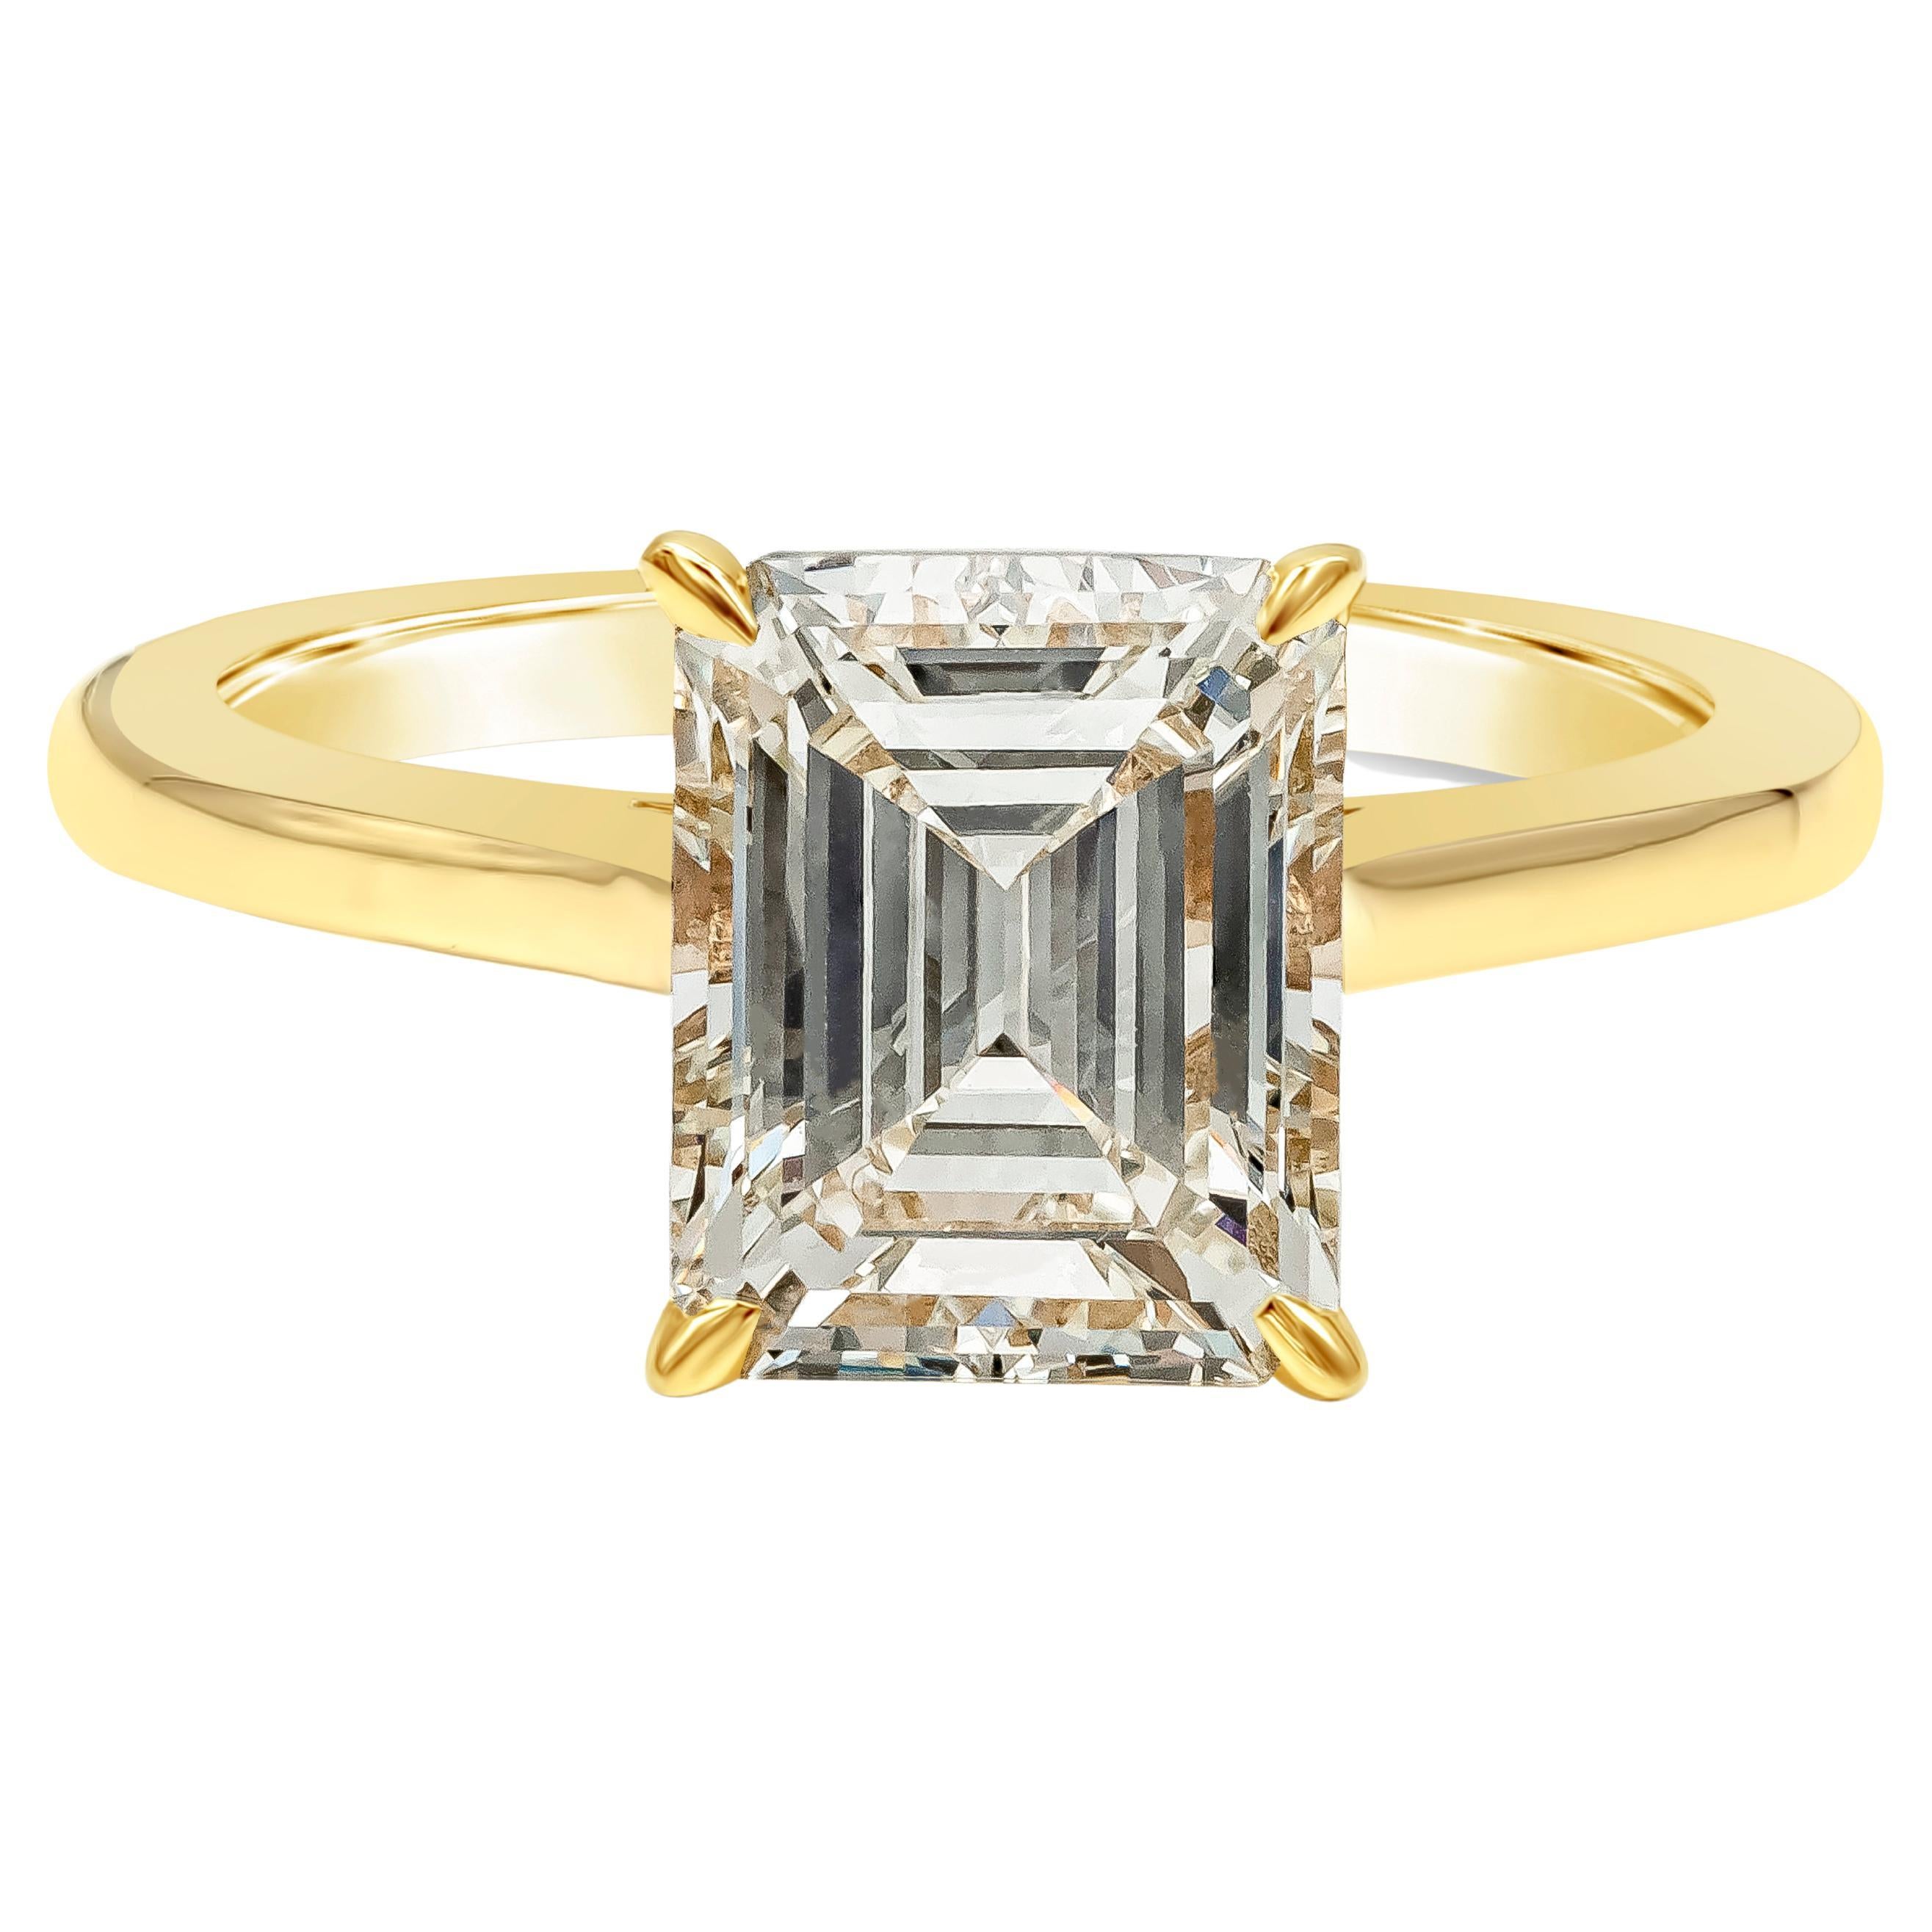 GIA Certified 2.30 Carat Emerald Cut Diamond Solitaire Engagement Ring